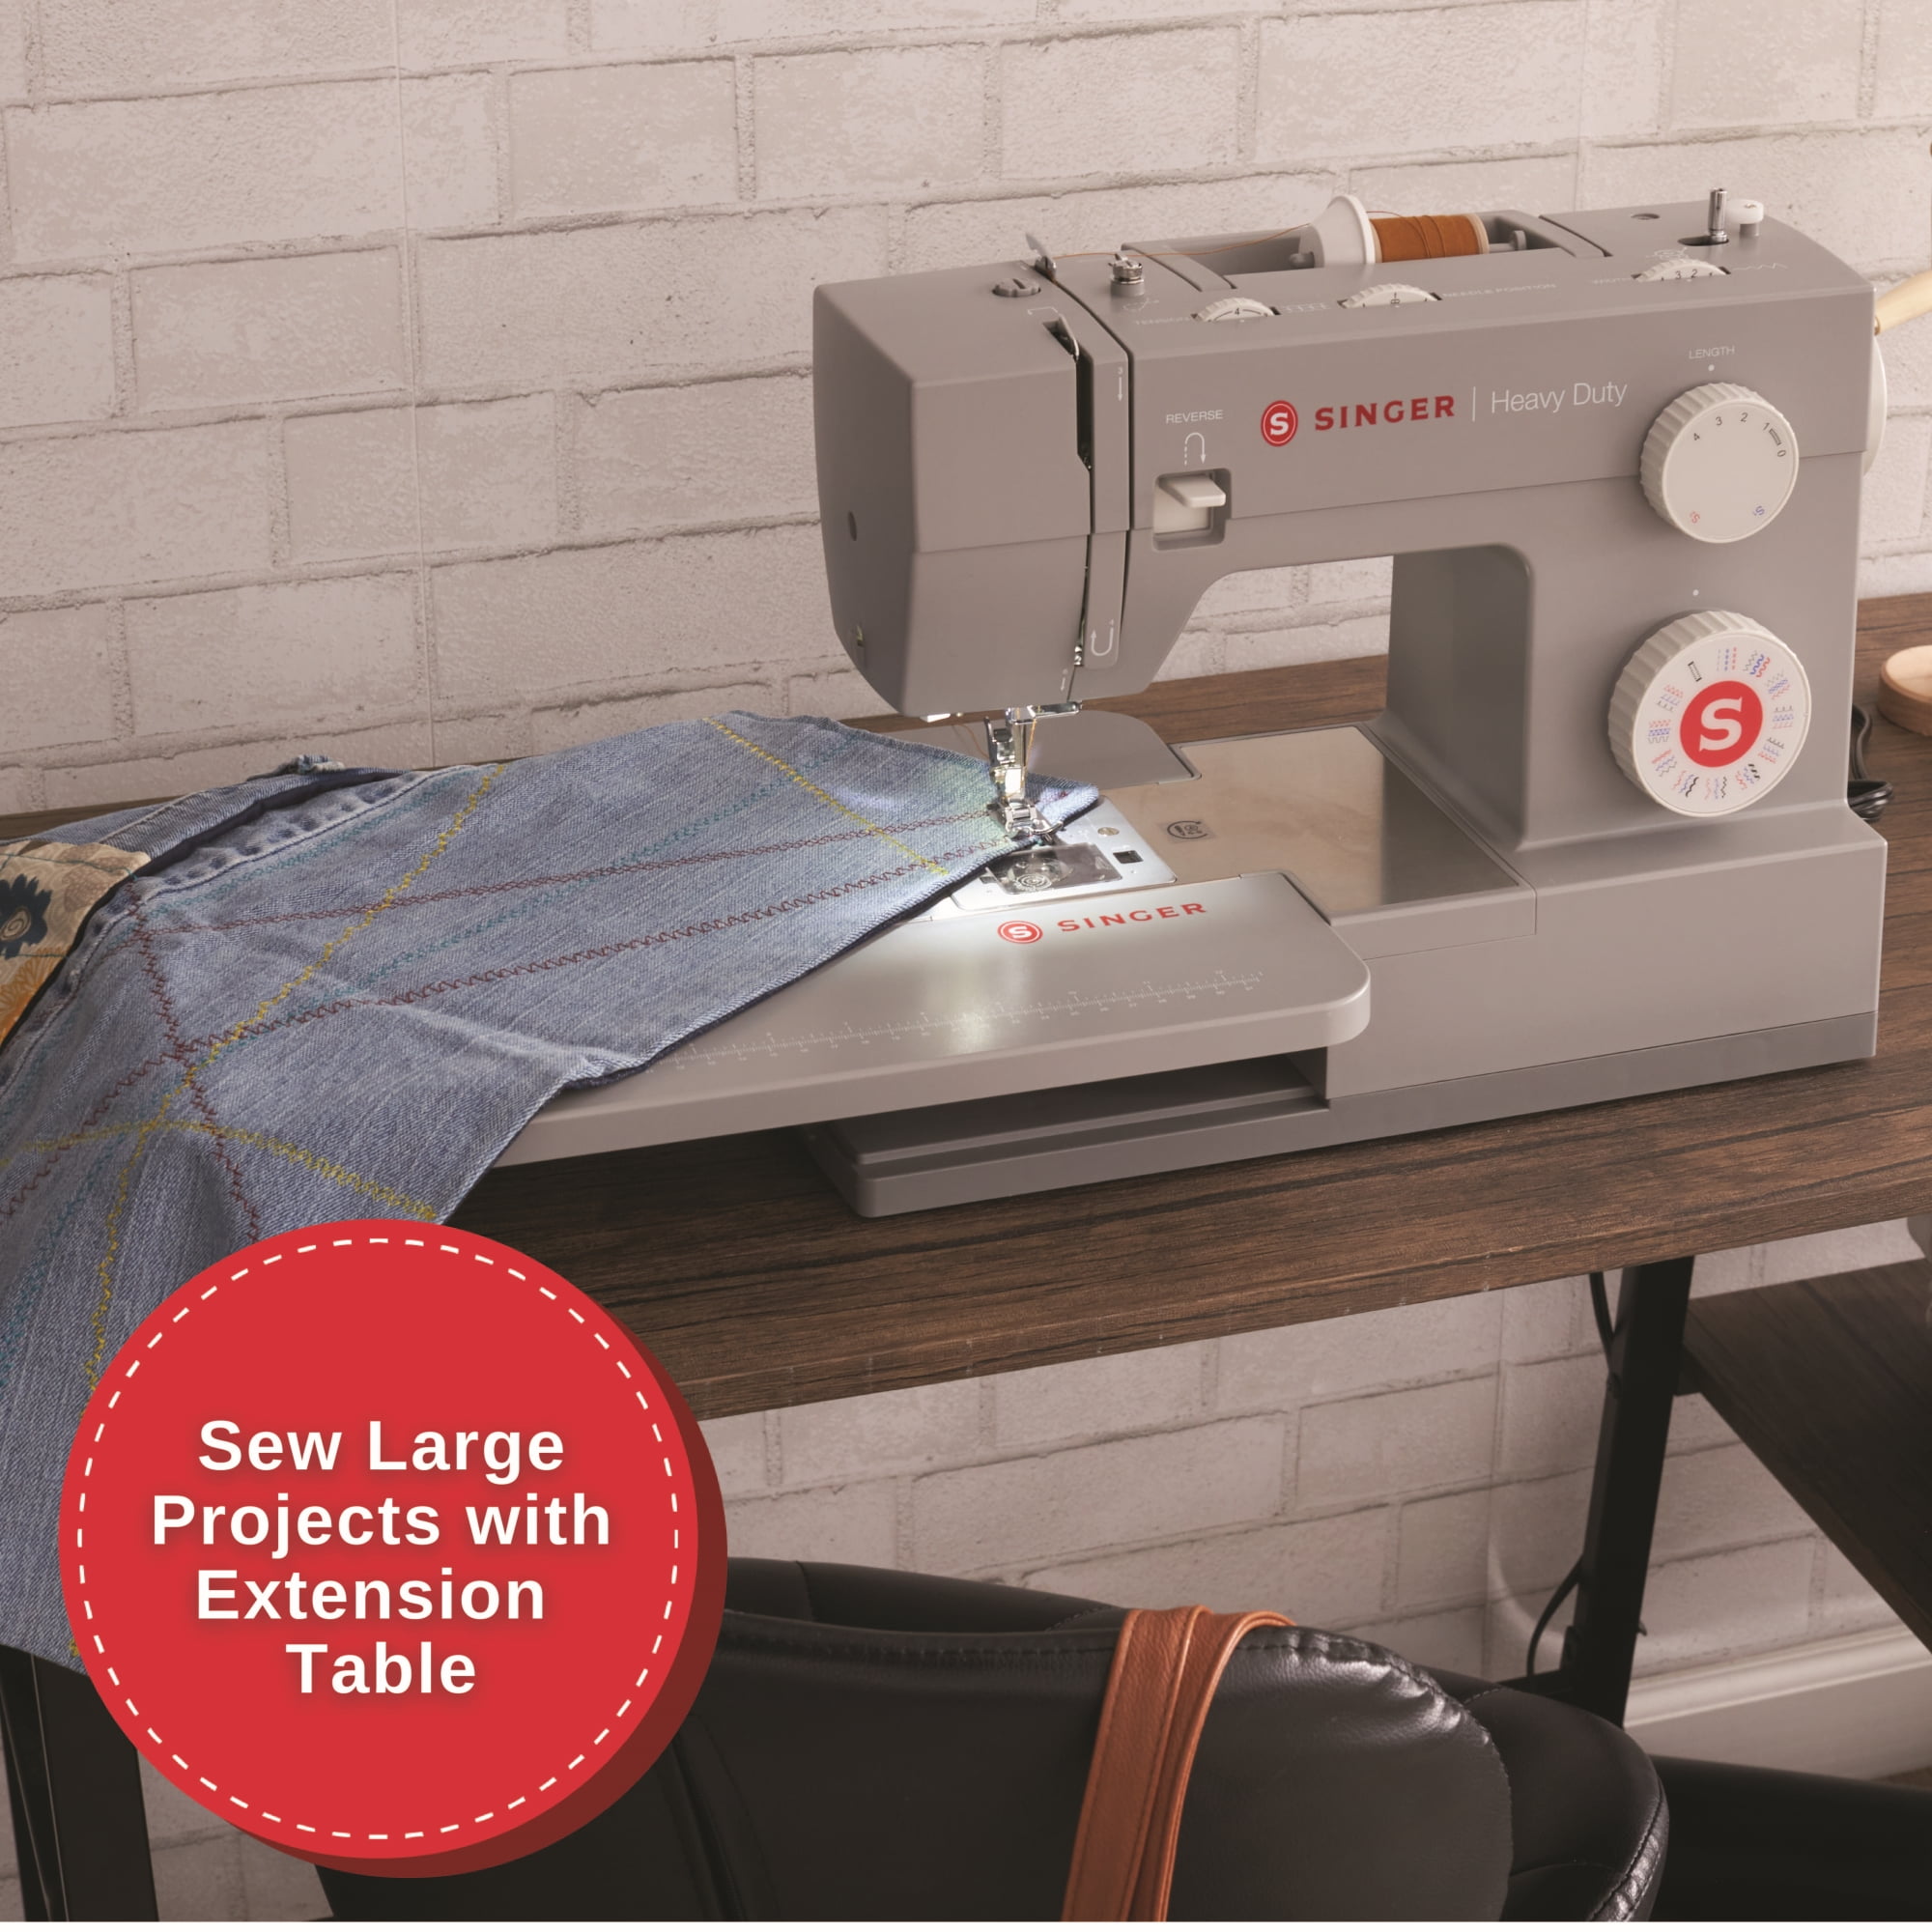 HOW TO THREAD A SEWING MACHINE // Singer Heavy Duty 4452 Sewing